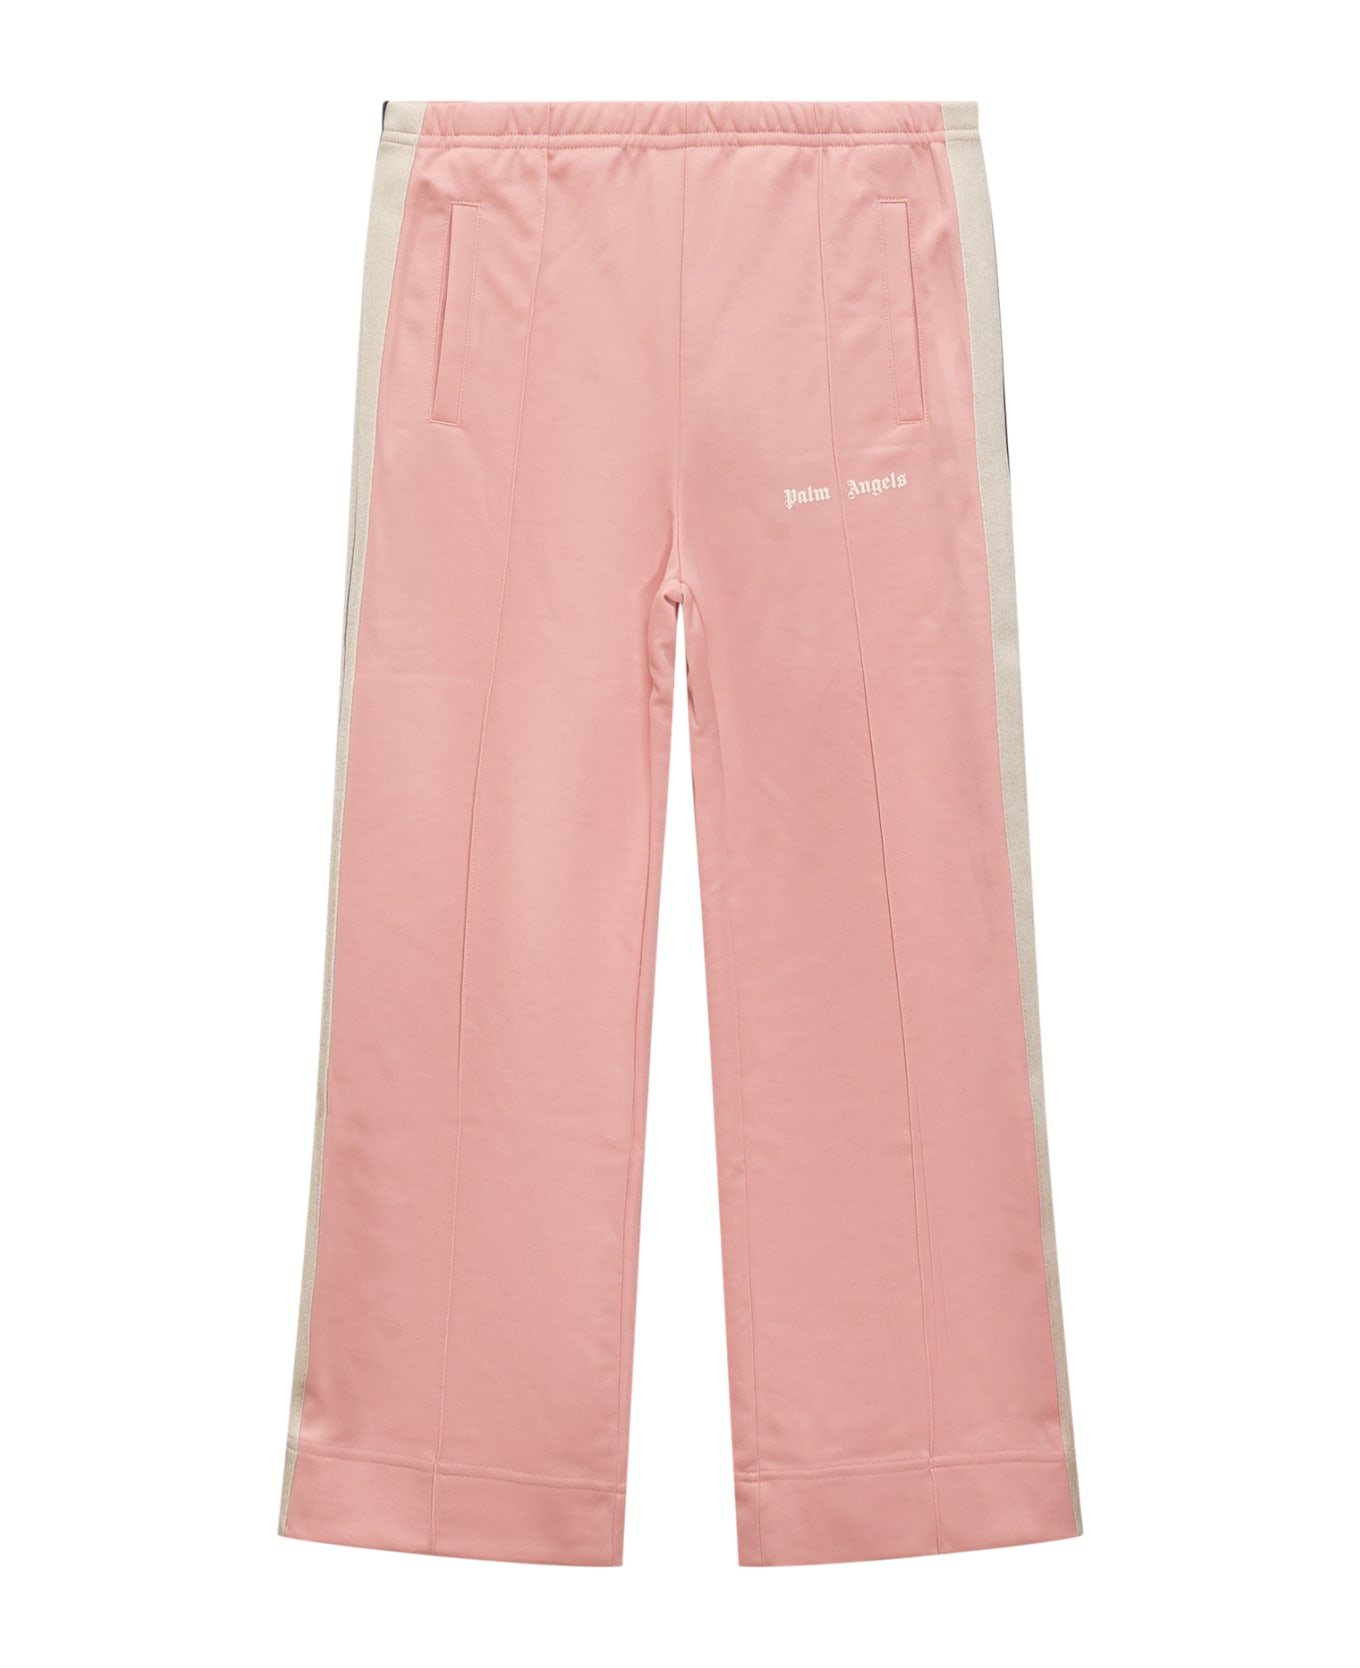 Palm Angels Logo Pants - PINK OFF WHITE